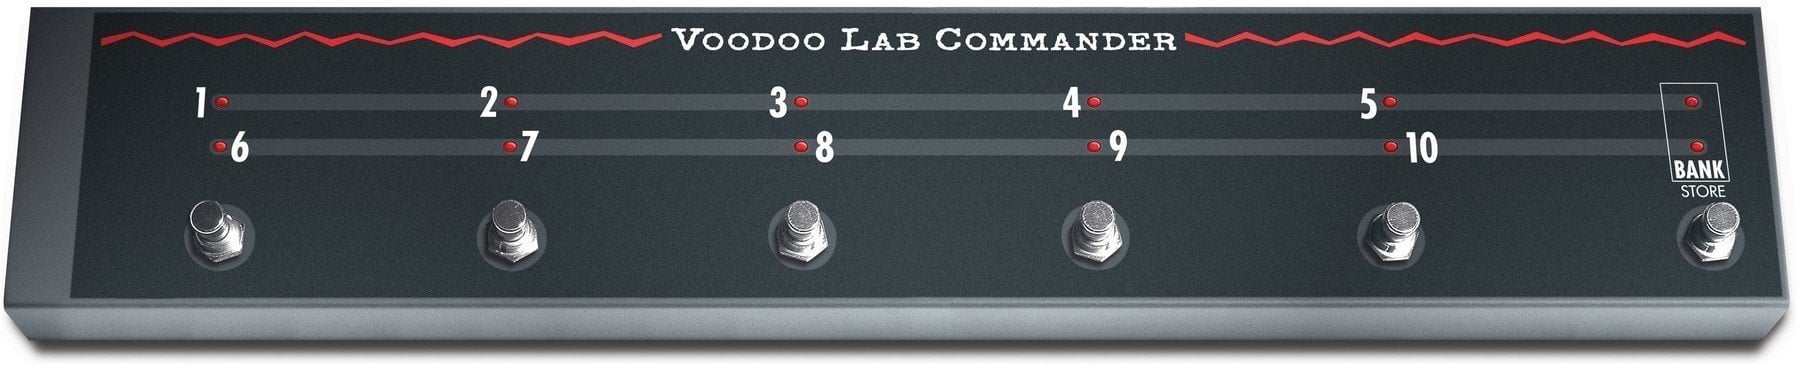 Footswitch Voodoo Lab Commander Footswitch